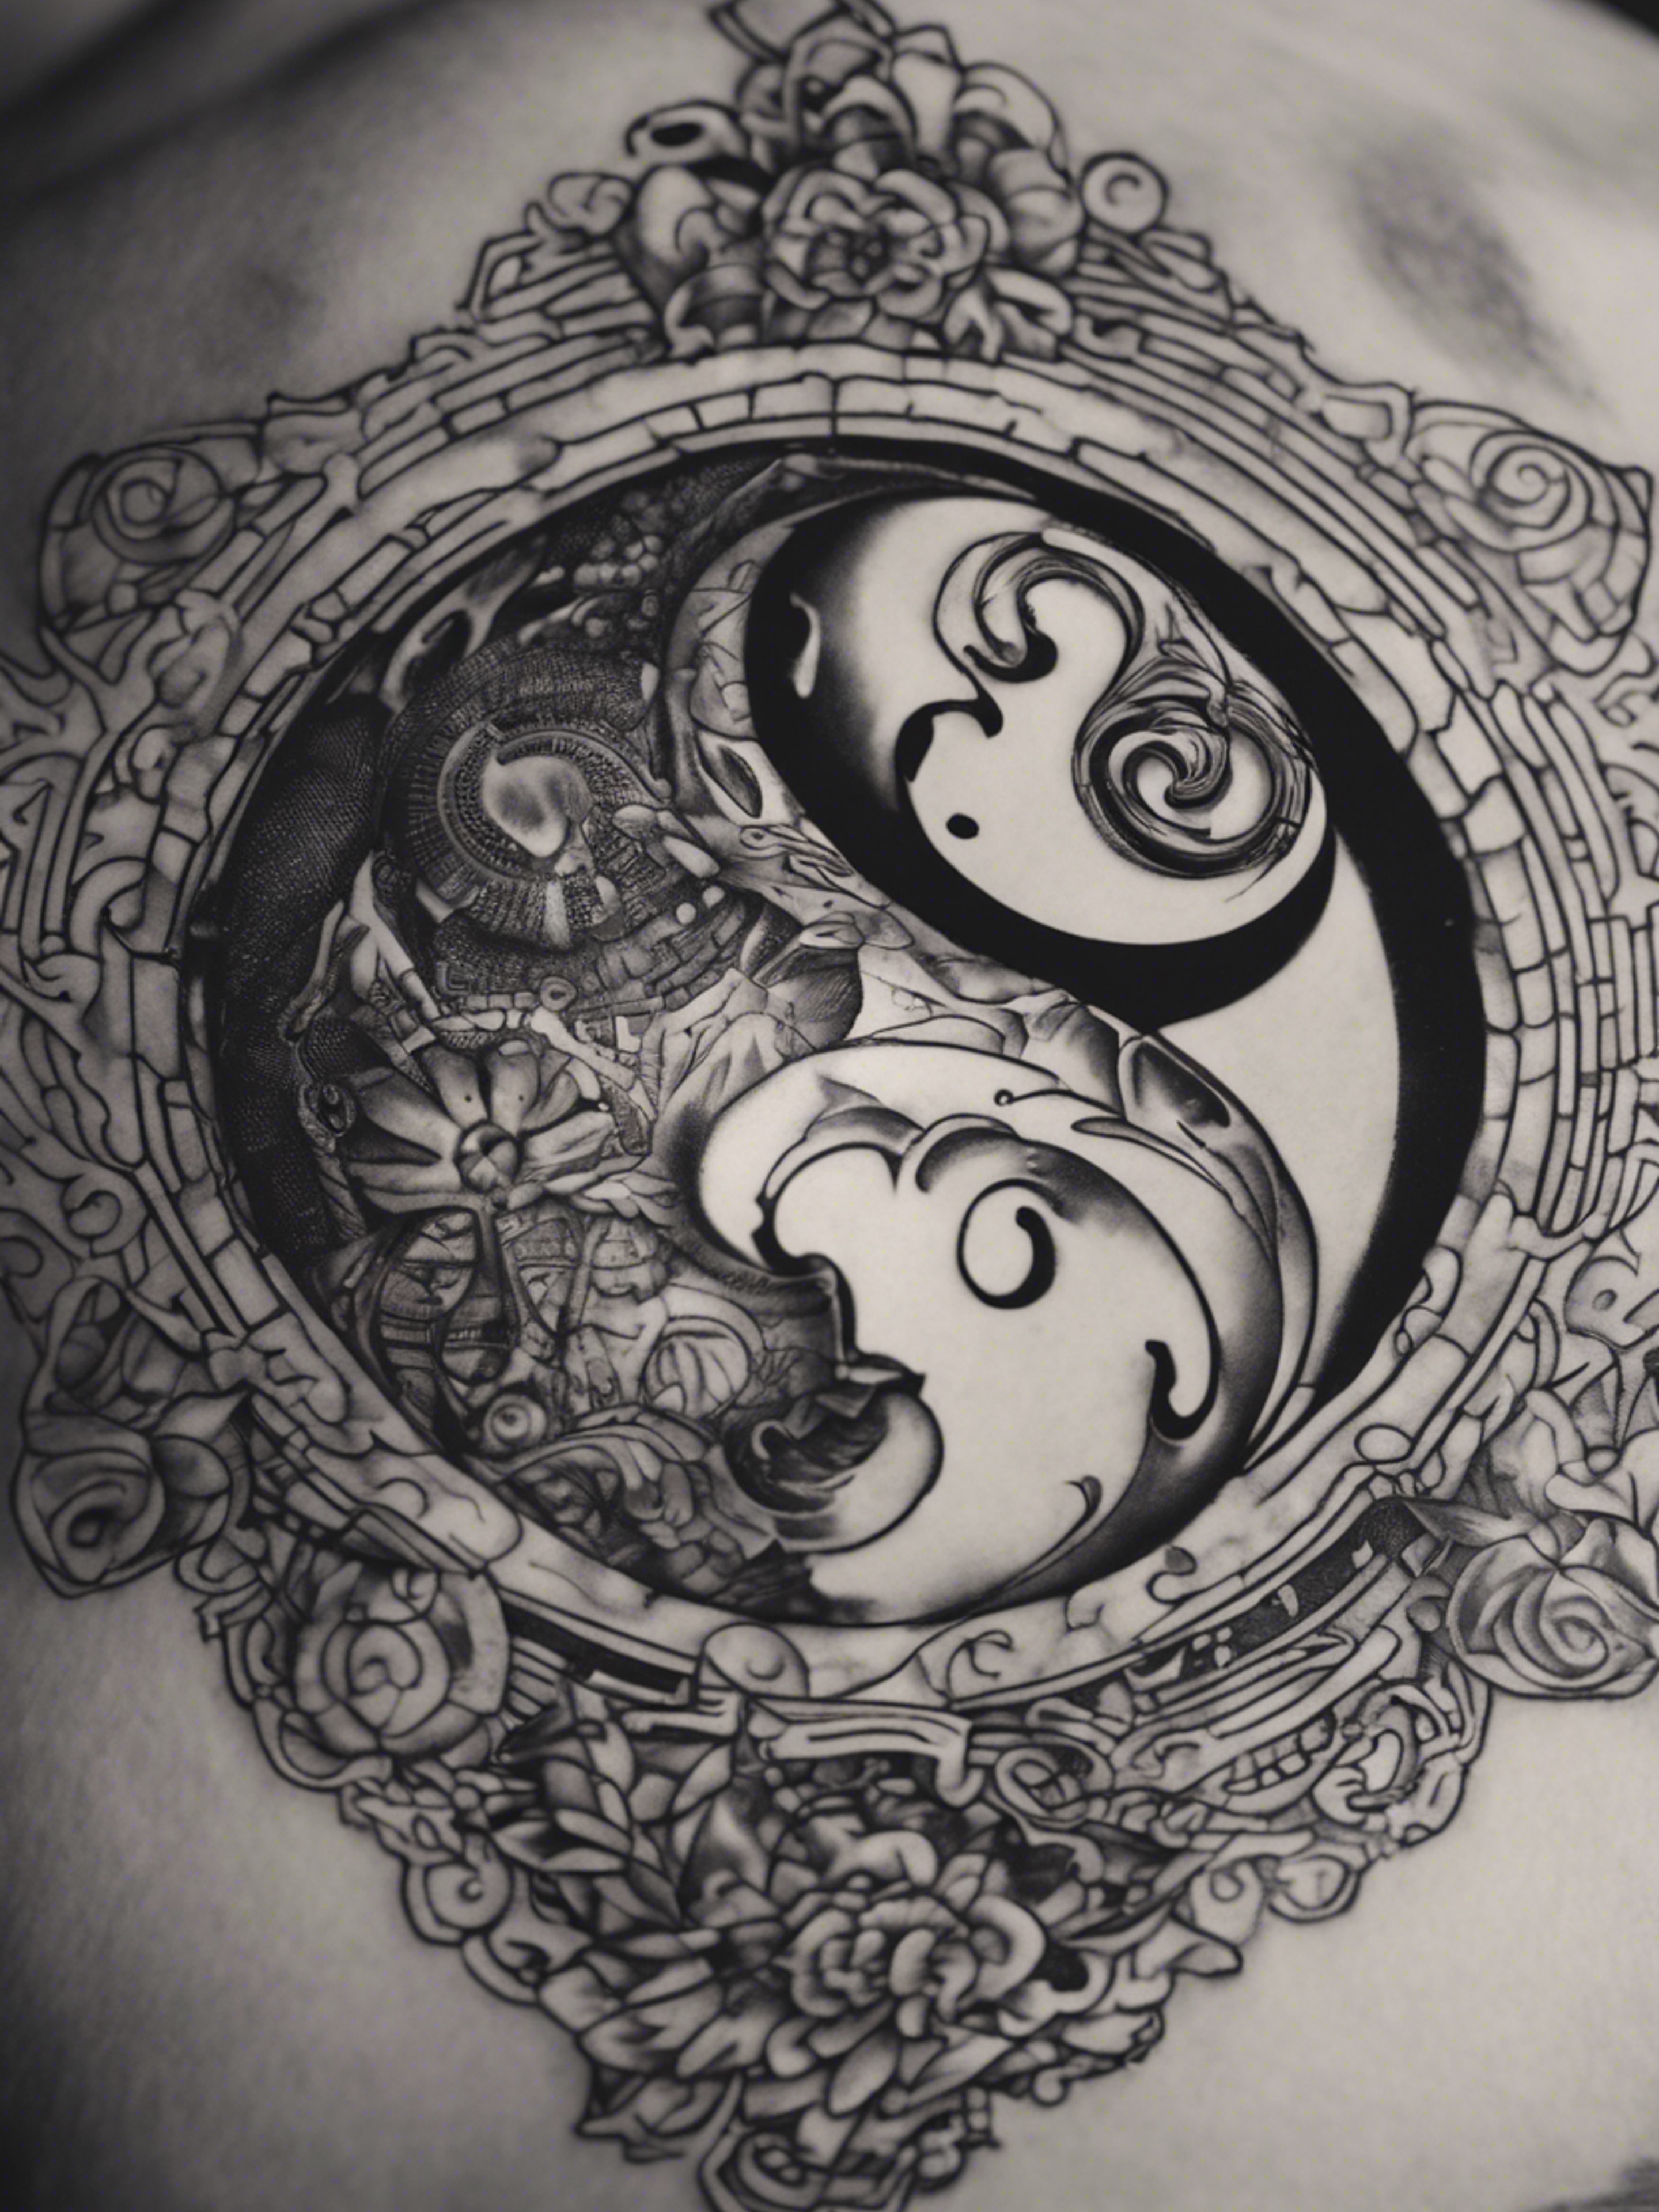 A black and gray tattoo demonstrating the sharp contrast of yin and yang. Валлпапер[cf6688009cd14e619f30]